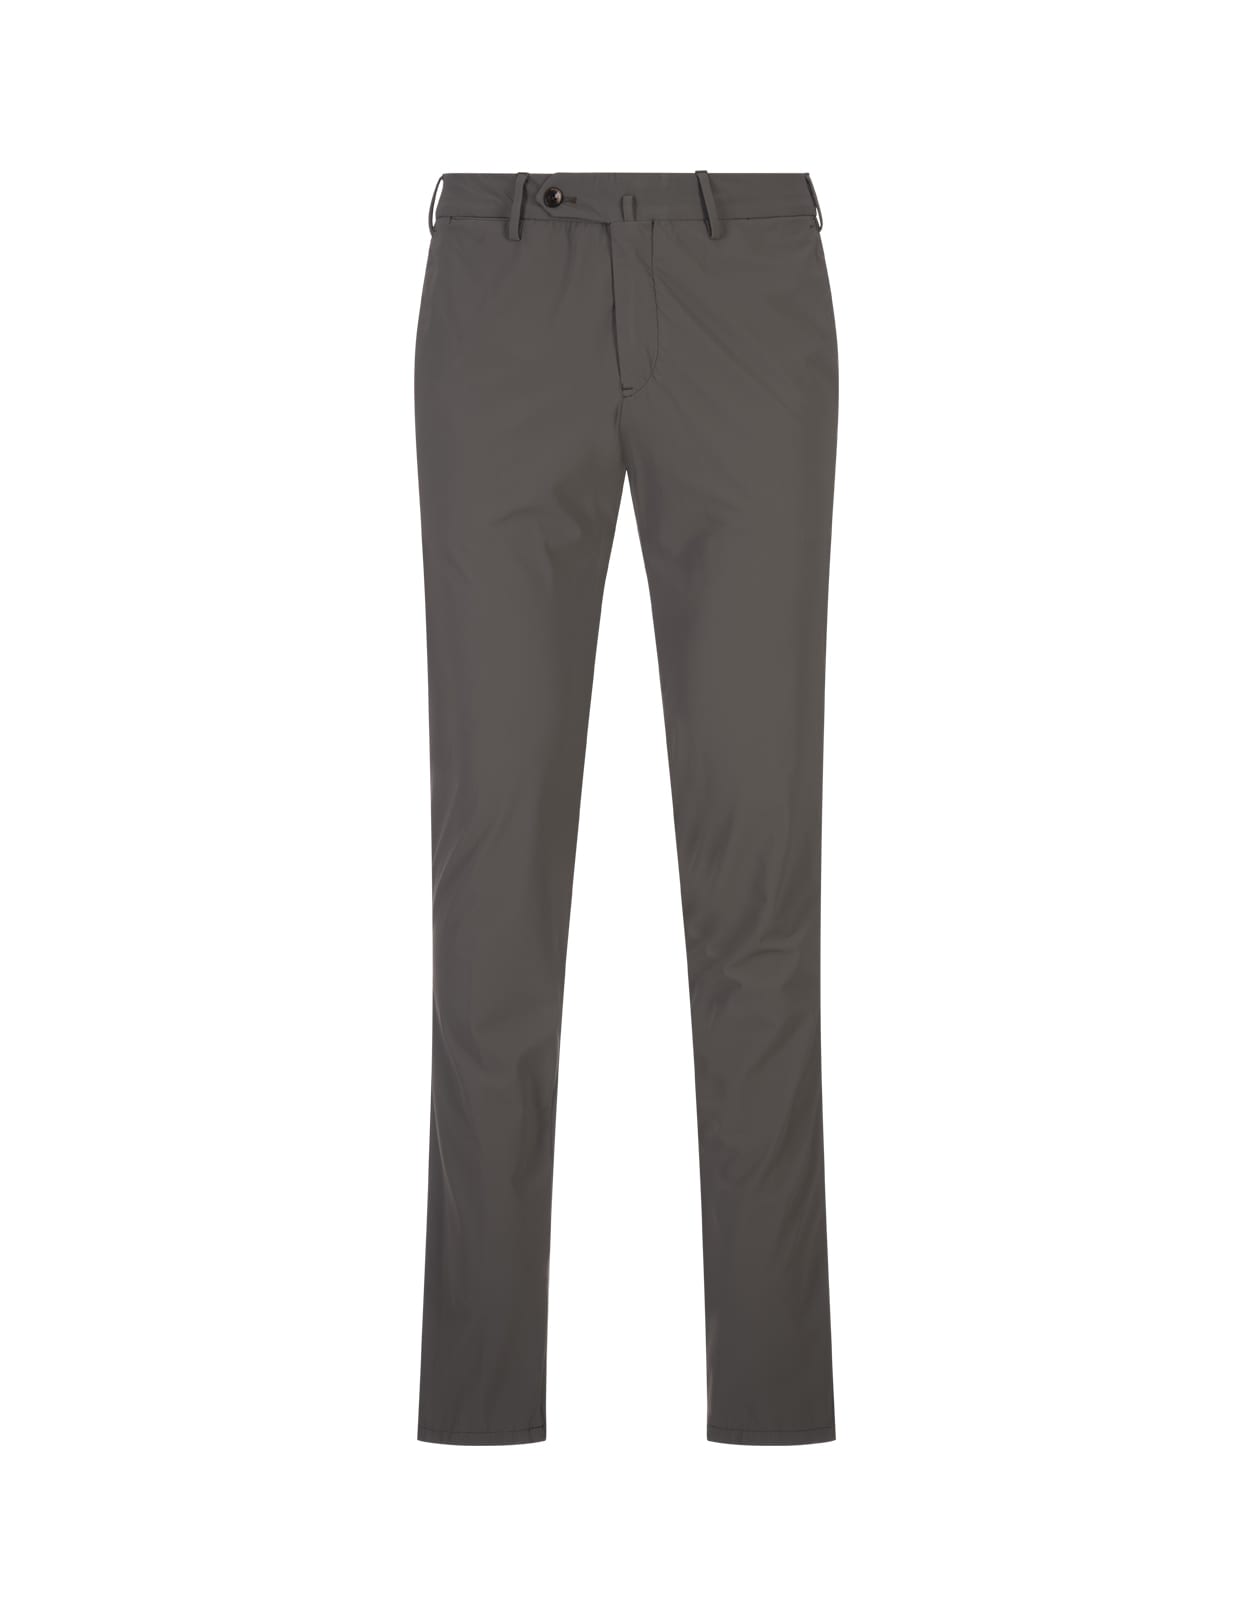 Shop Pt01 Grey Kinetic Fabric Classic Trousers